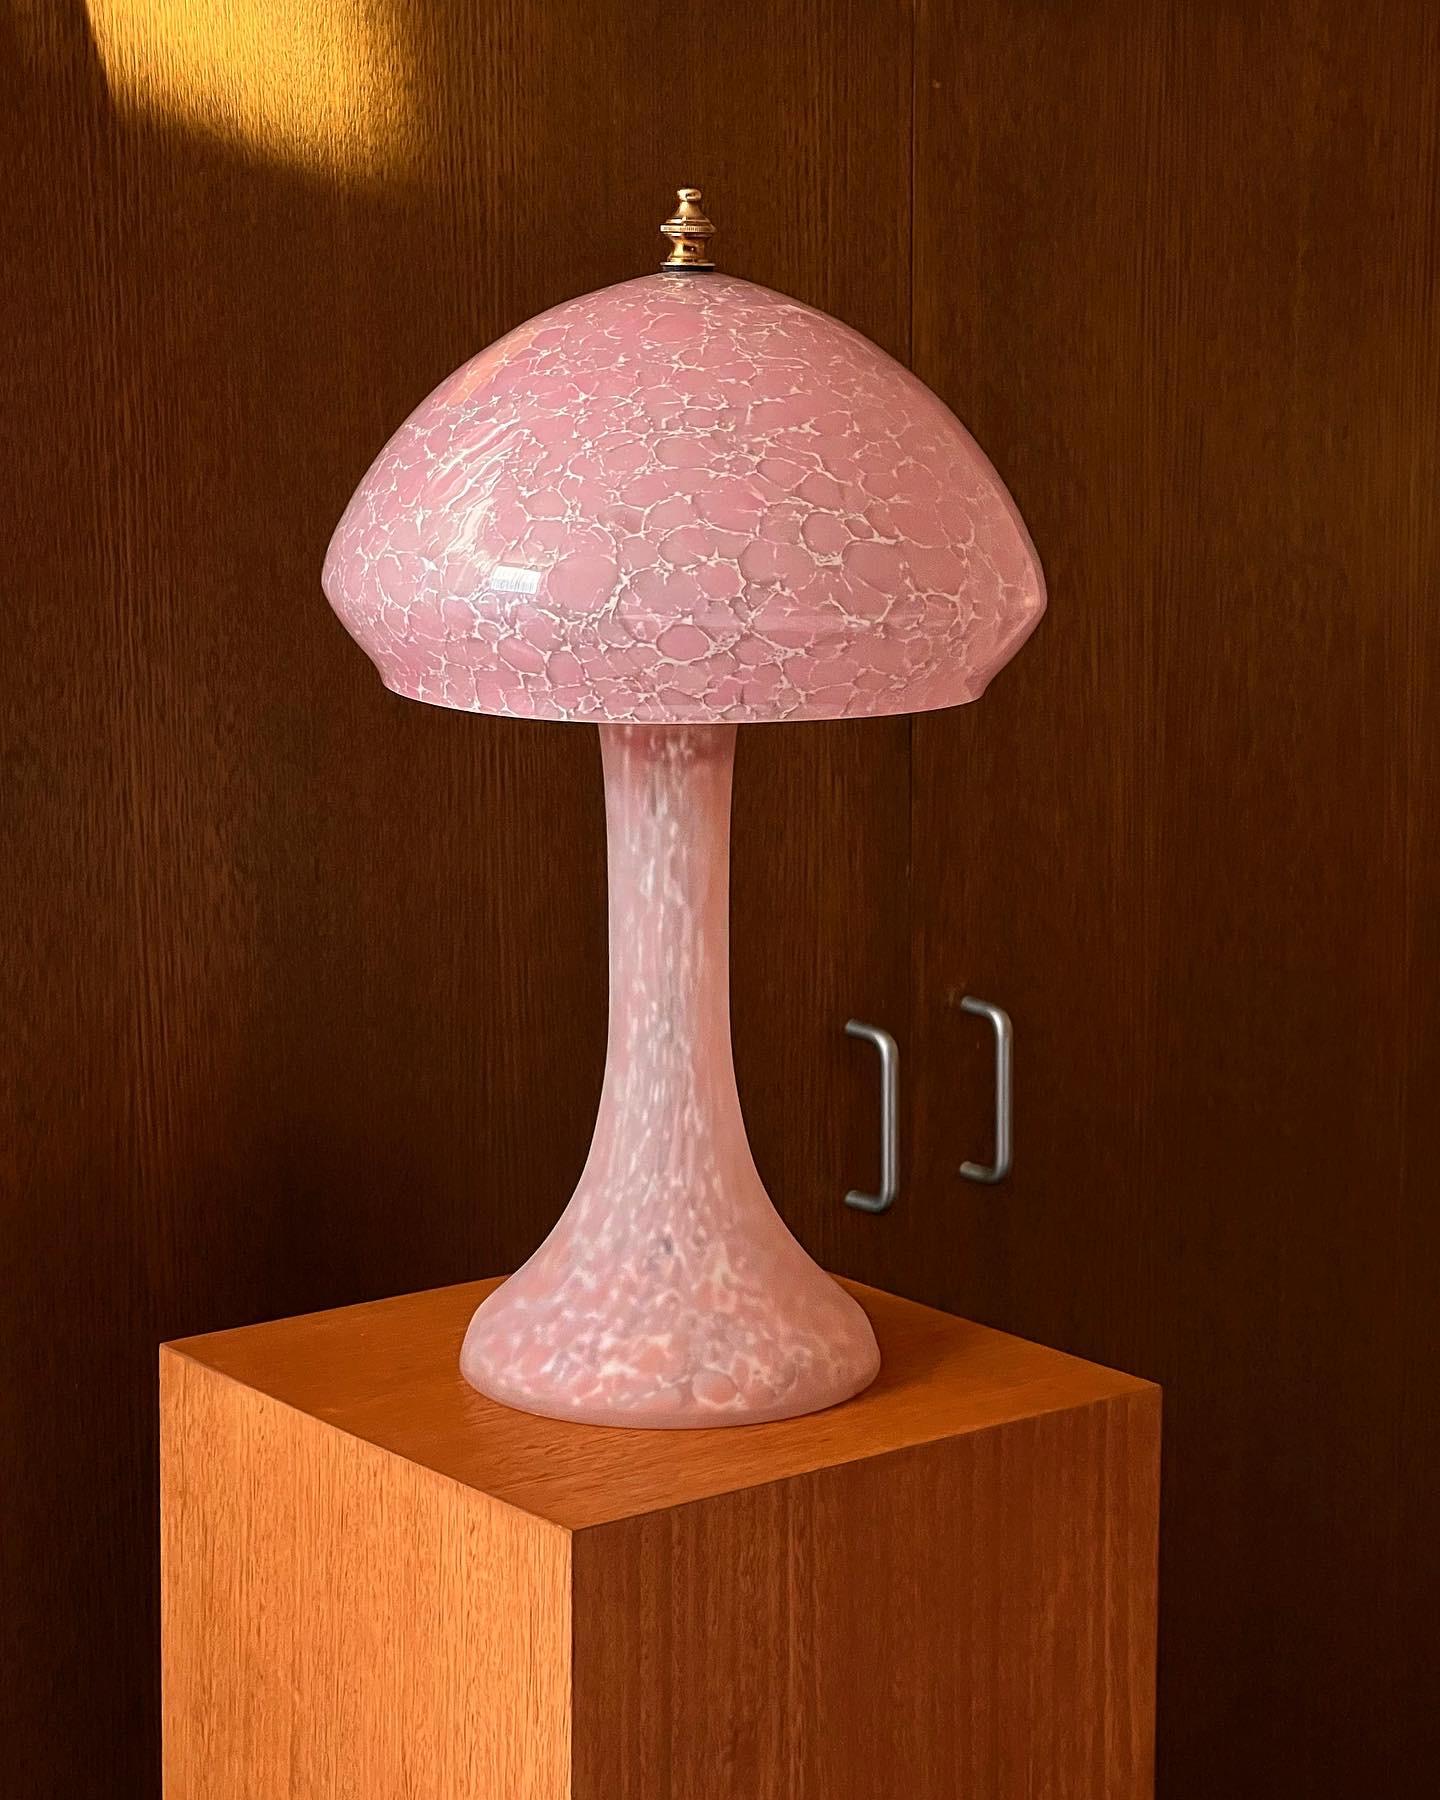 Made in France, circa 1970s. Both with original La Rochere stickers.
The price displayed is per lamp, I have two available. 
Crafted from pink and white veined blown glass. The mushroom dome features a glossy finish, while the base has a matte